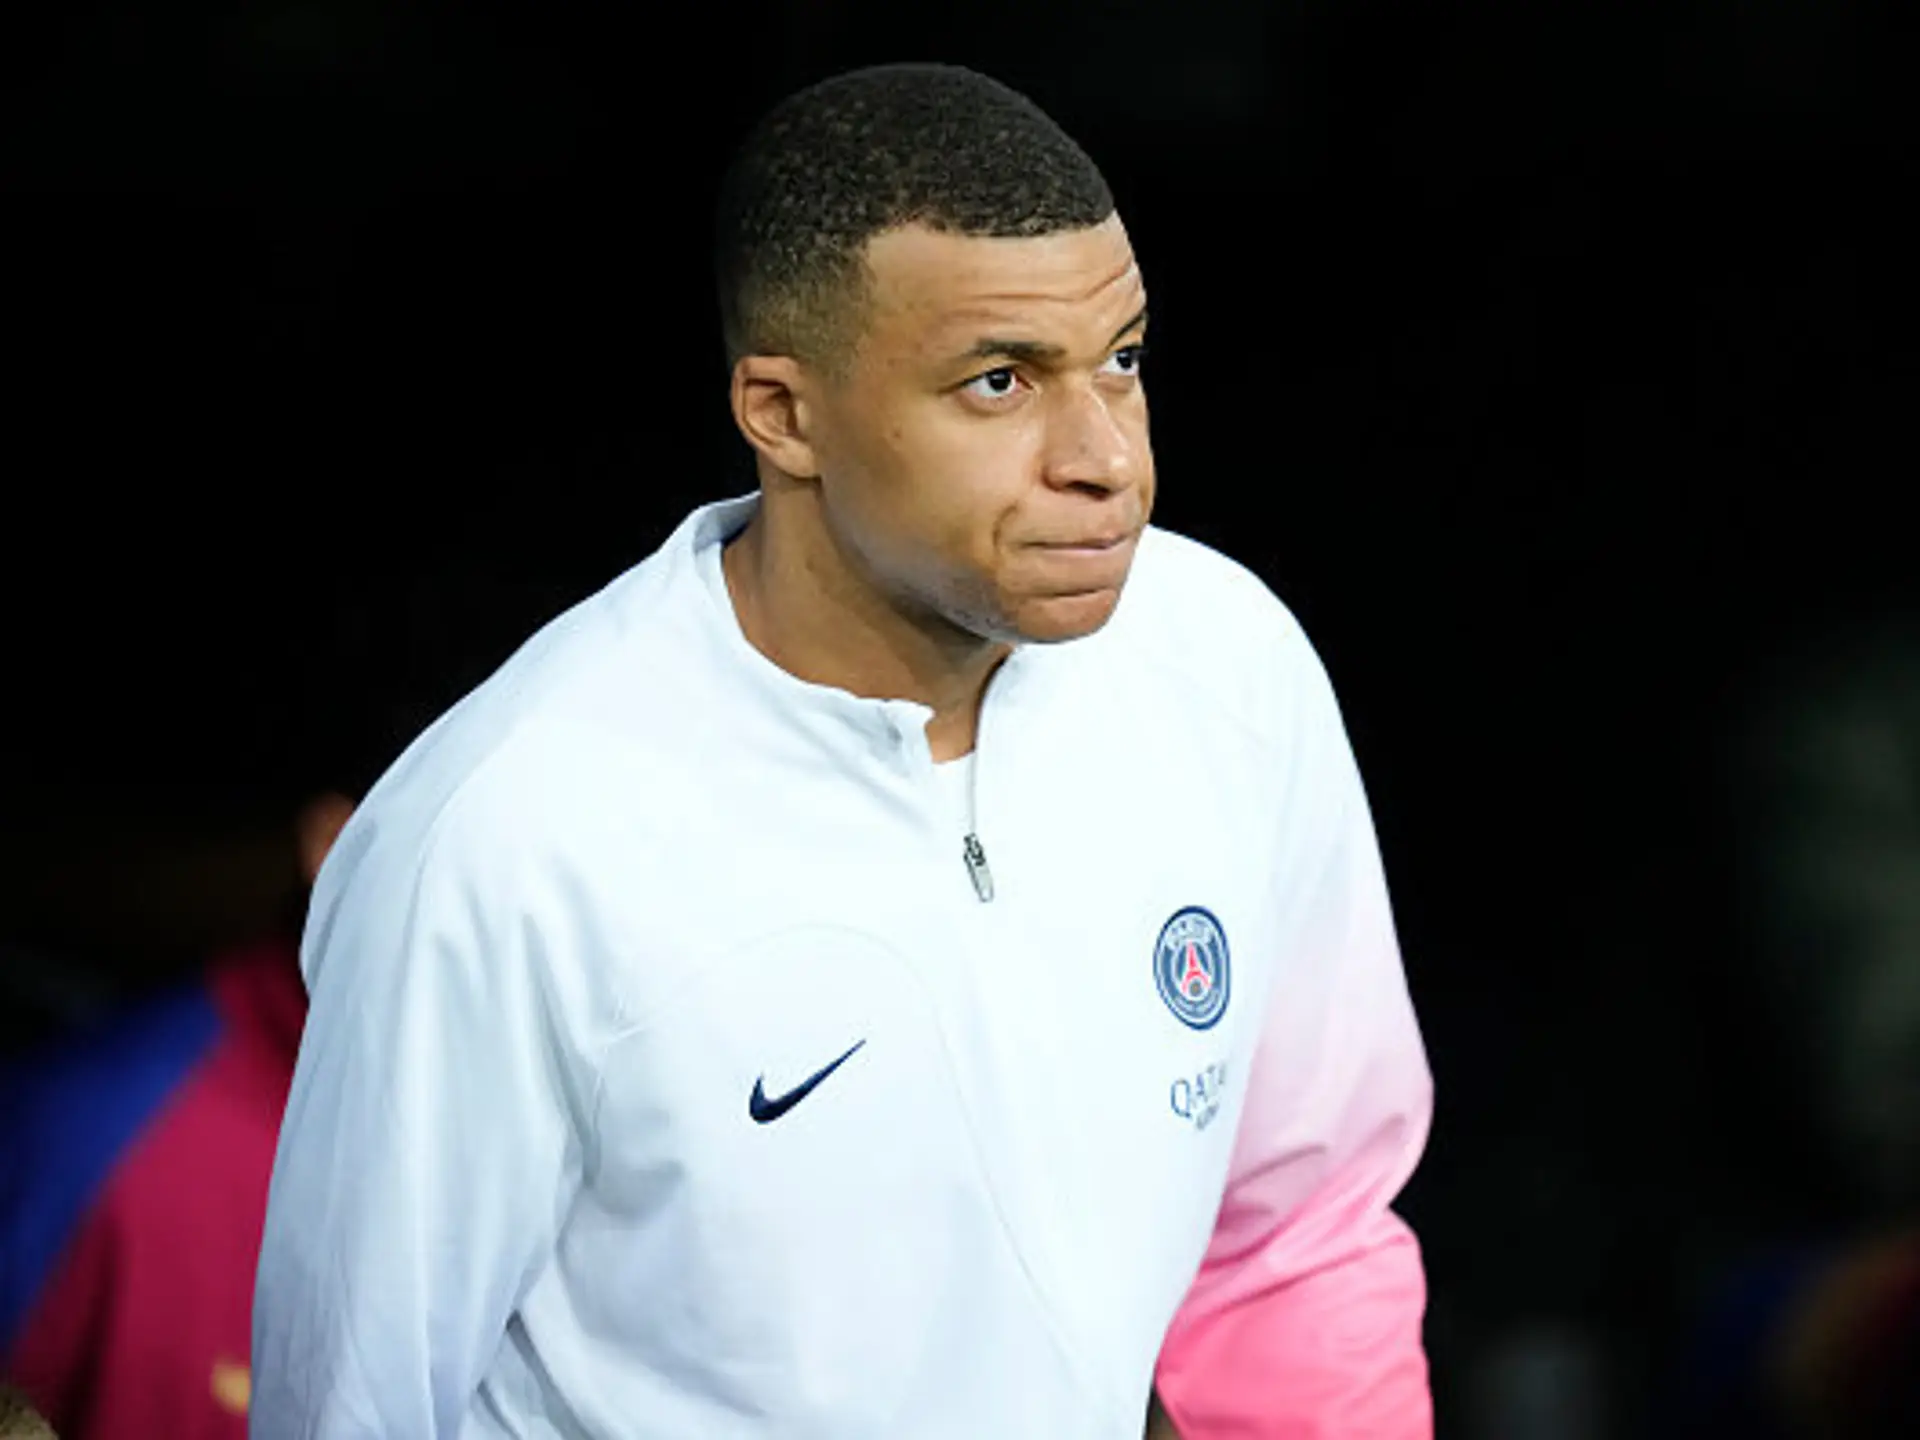 It is rumored that Mbappe said that he wants to play in the center of 